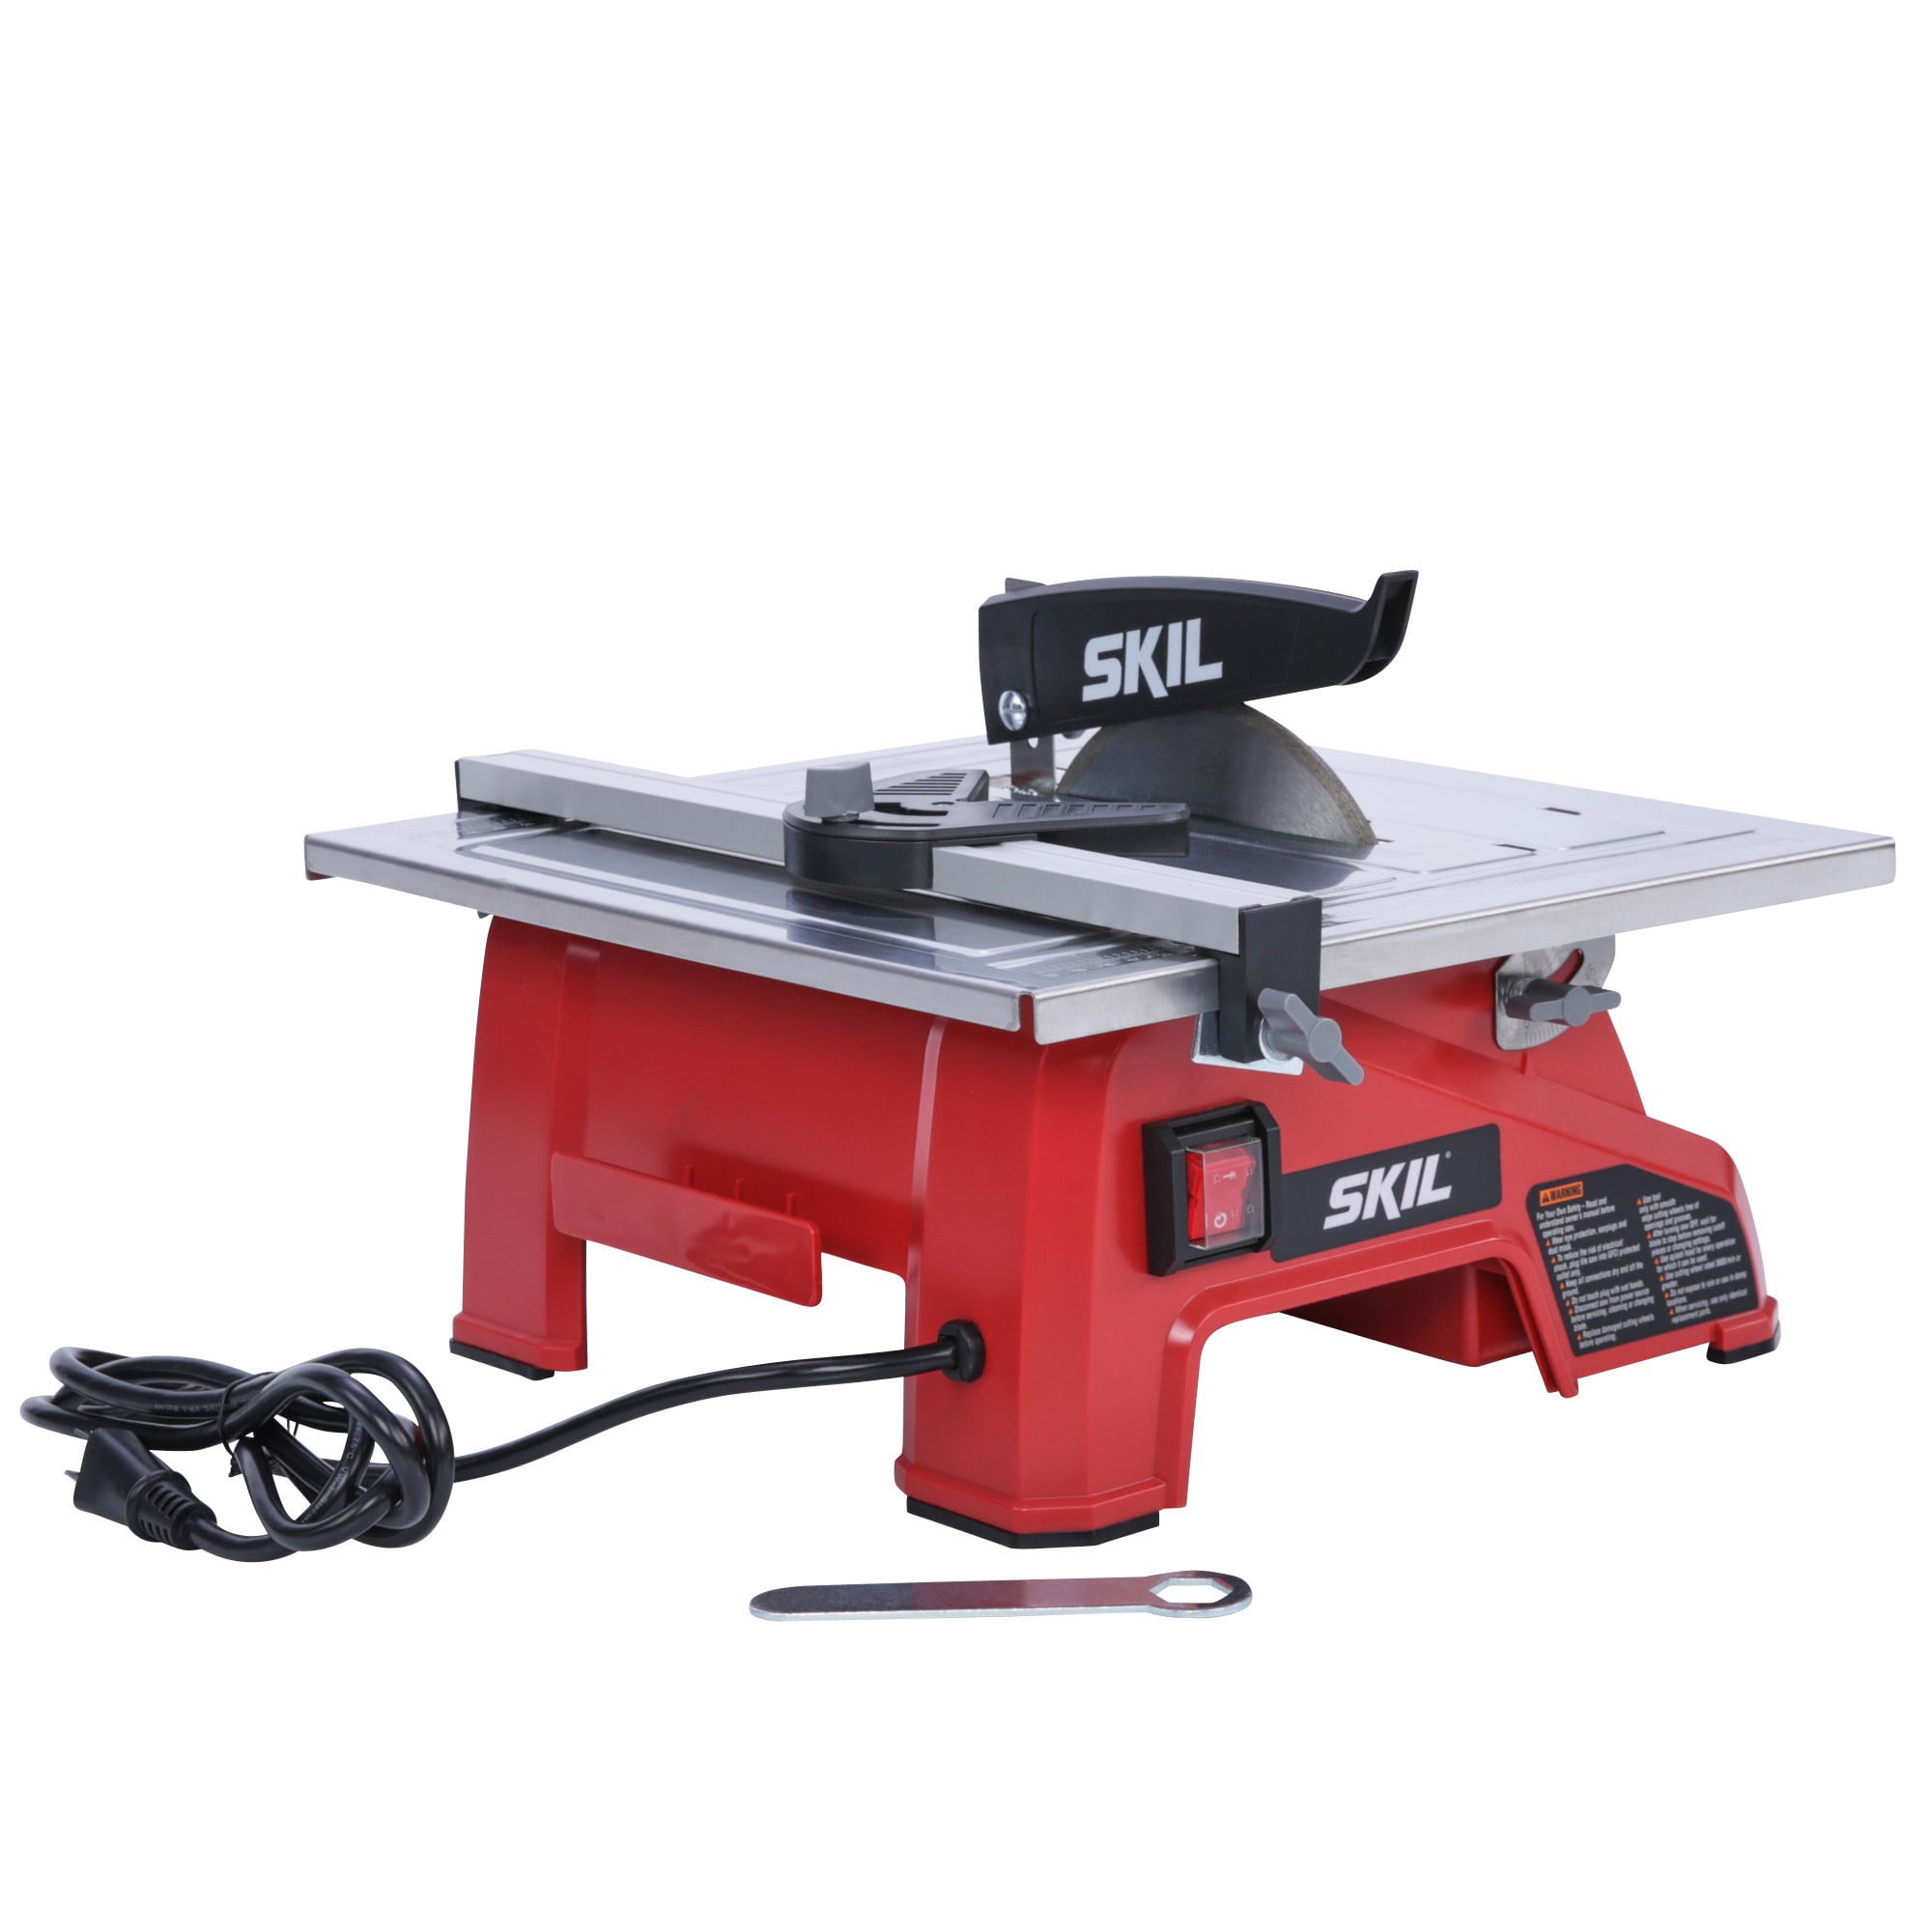 Skil 3550-02 7-Inch Wet Tile Saw with HydroLock Water Containment System - 5